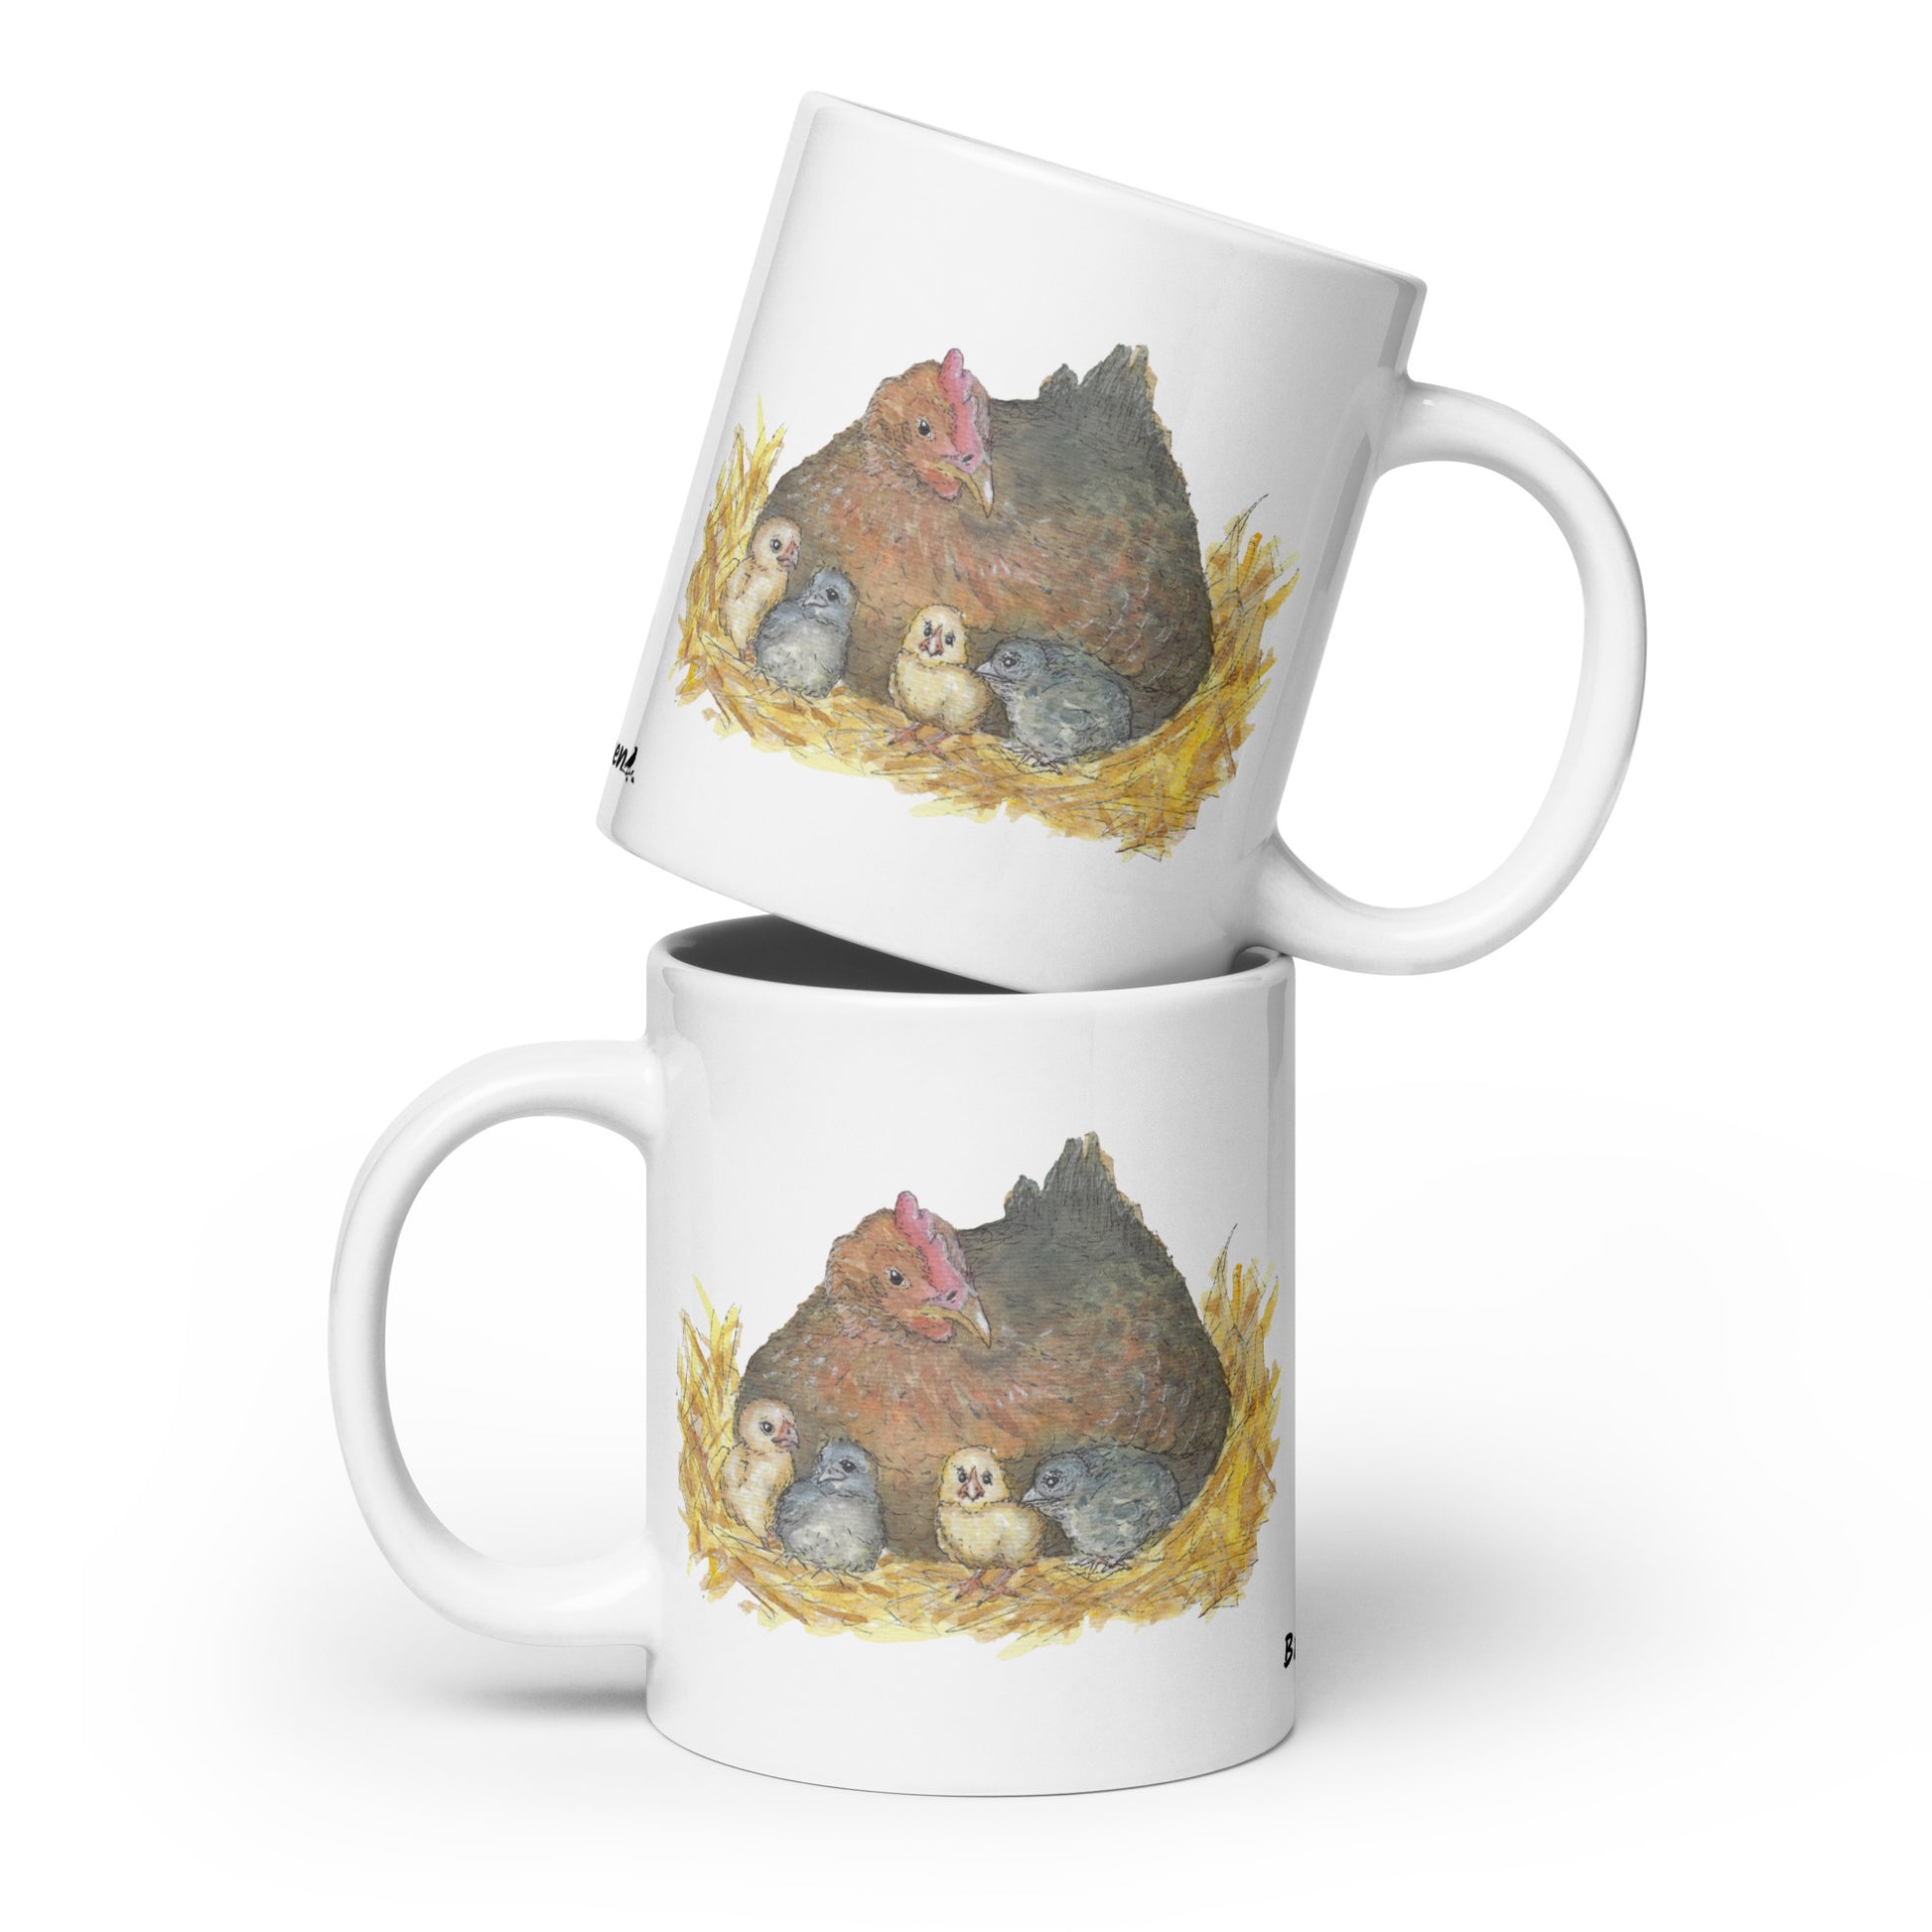 20 ounce white ceramic mug. Features double-sided print of a watercolor mother hen and chicks. Dishwasher and microwave safe.